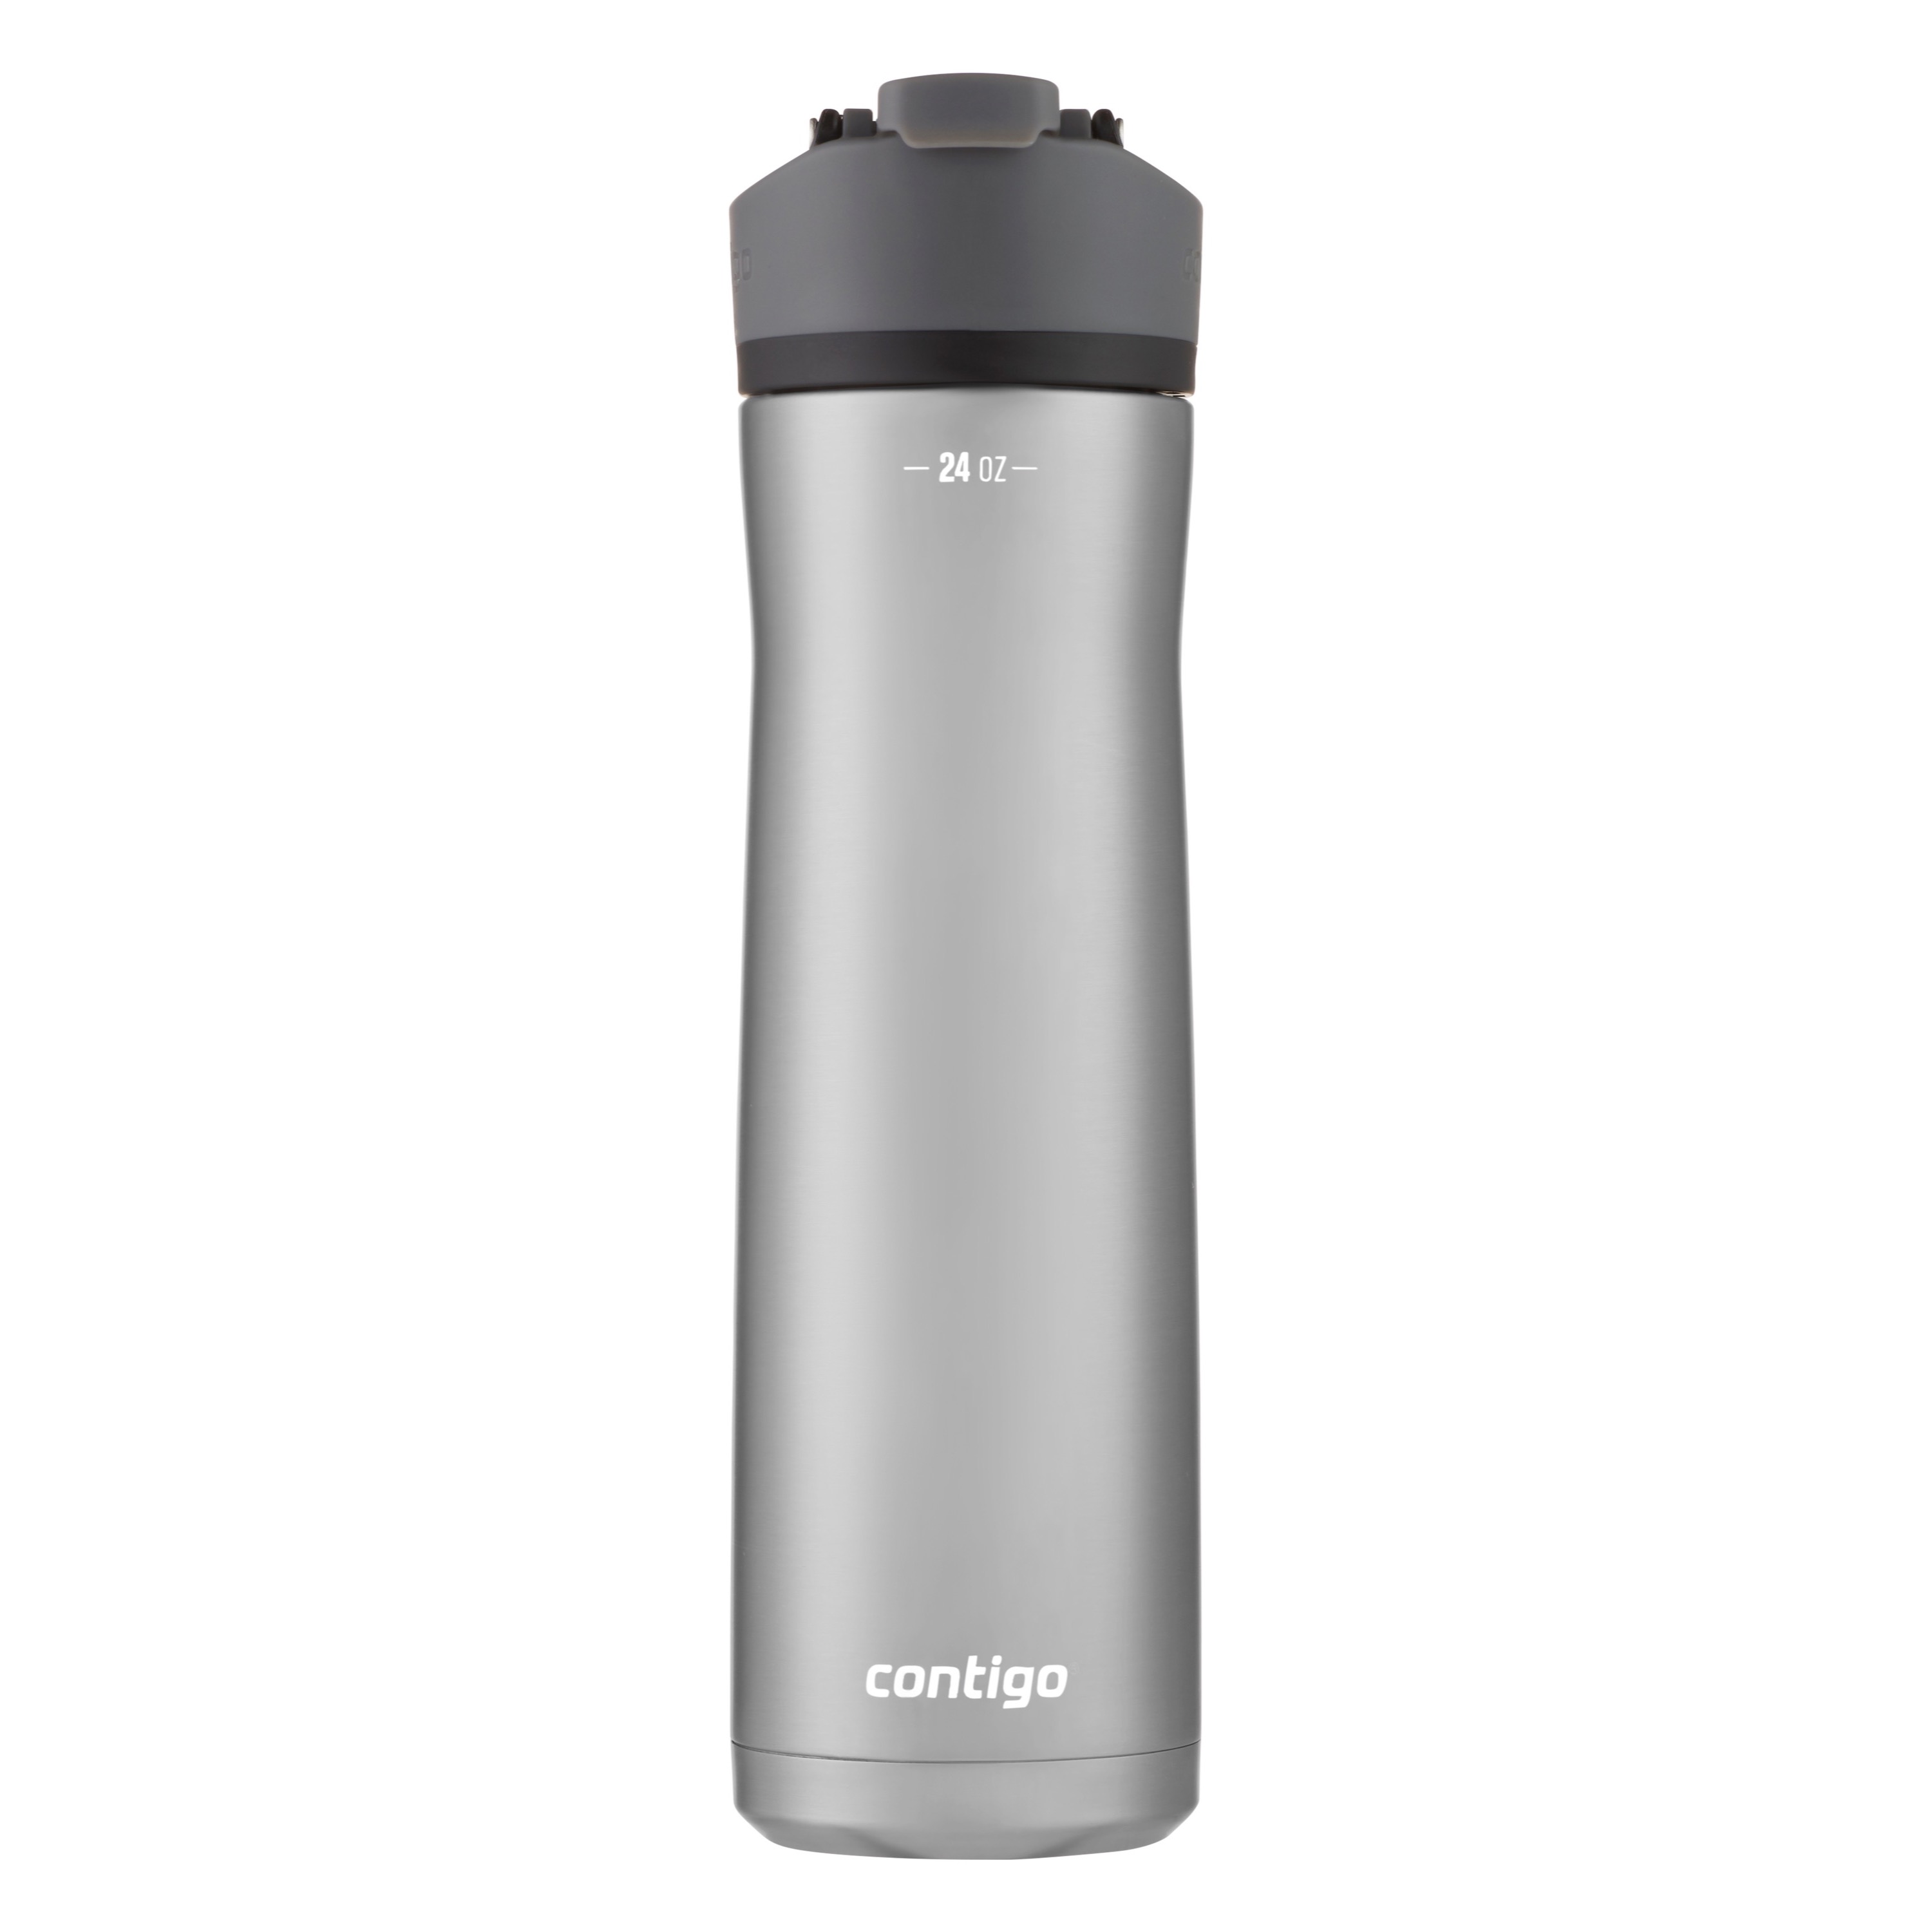 Contigo Cortland Chill 2.0 24 oz Silver, Gray and Licorice Solid Print Double Wall Vacuum Insulated Stainless Steel Water Bottle with Wide Mouth Lid - image 1 of 9